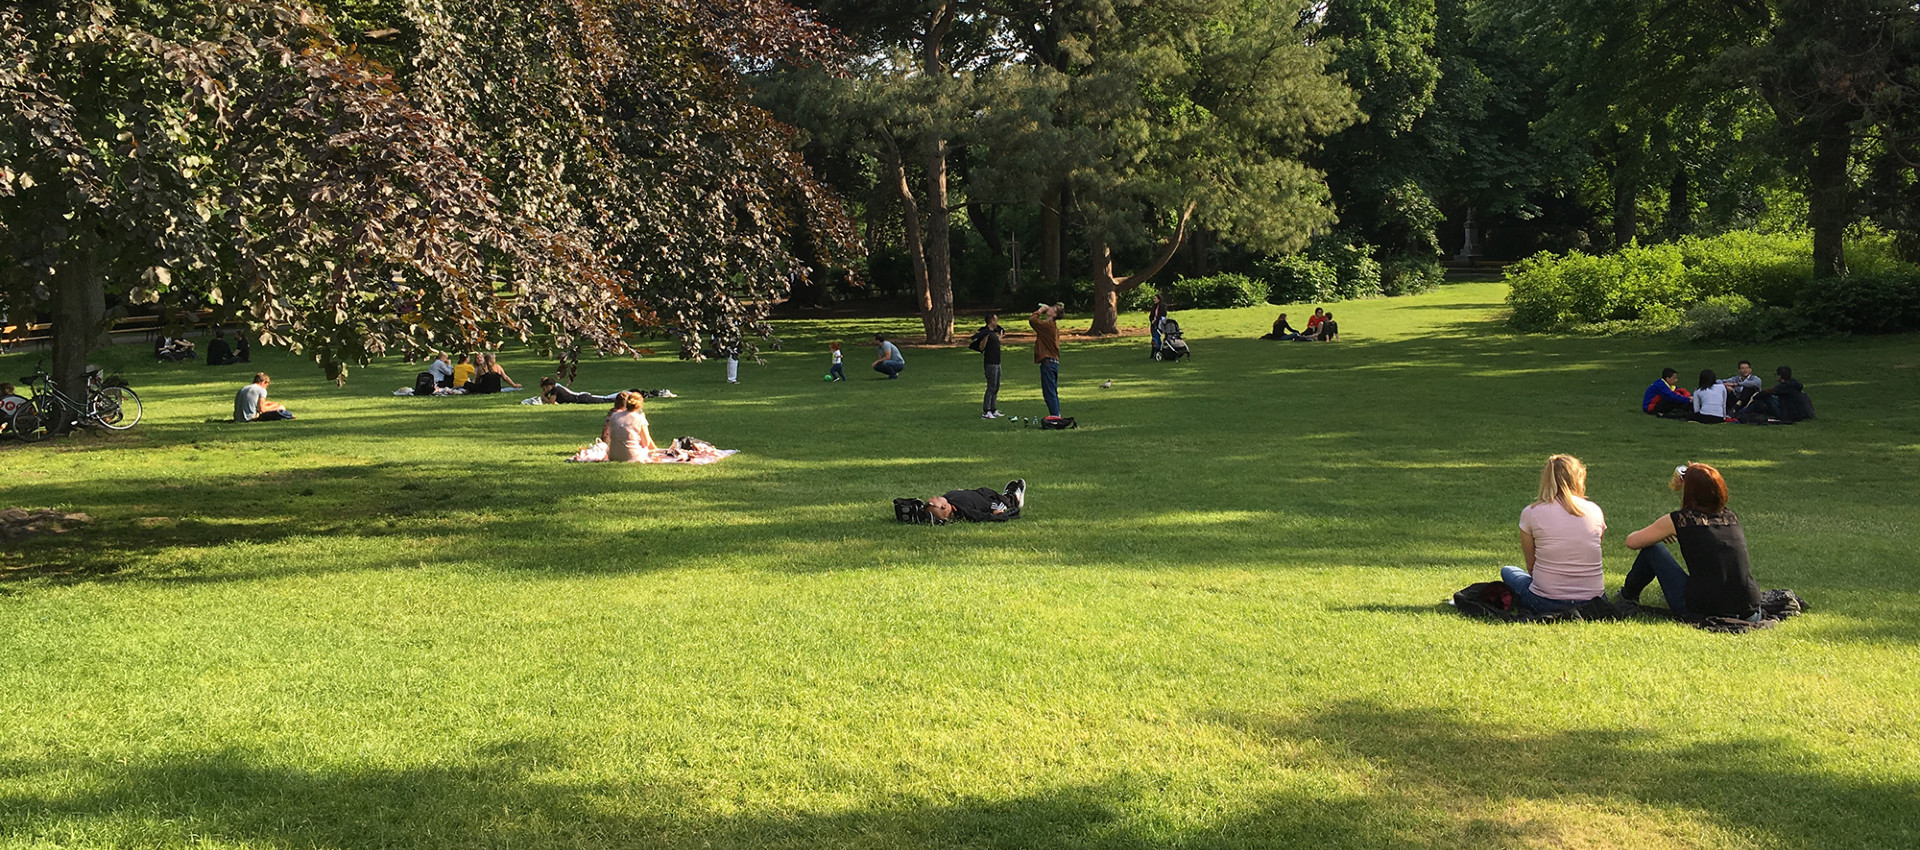 People sitting and relaxing in a park under the sun